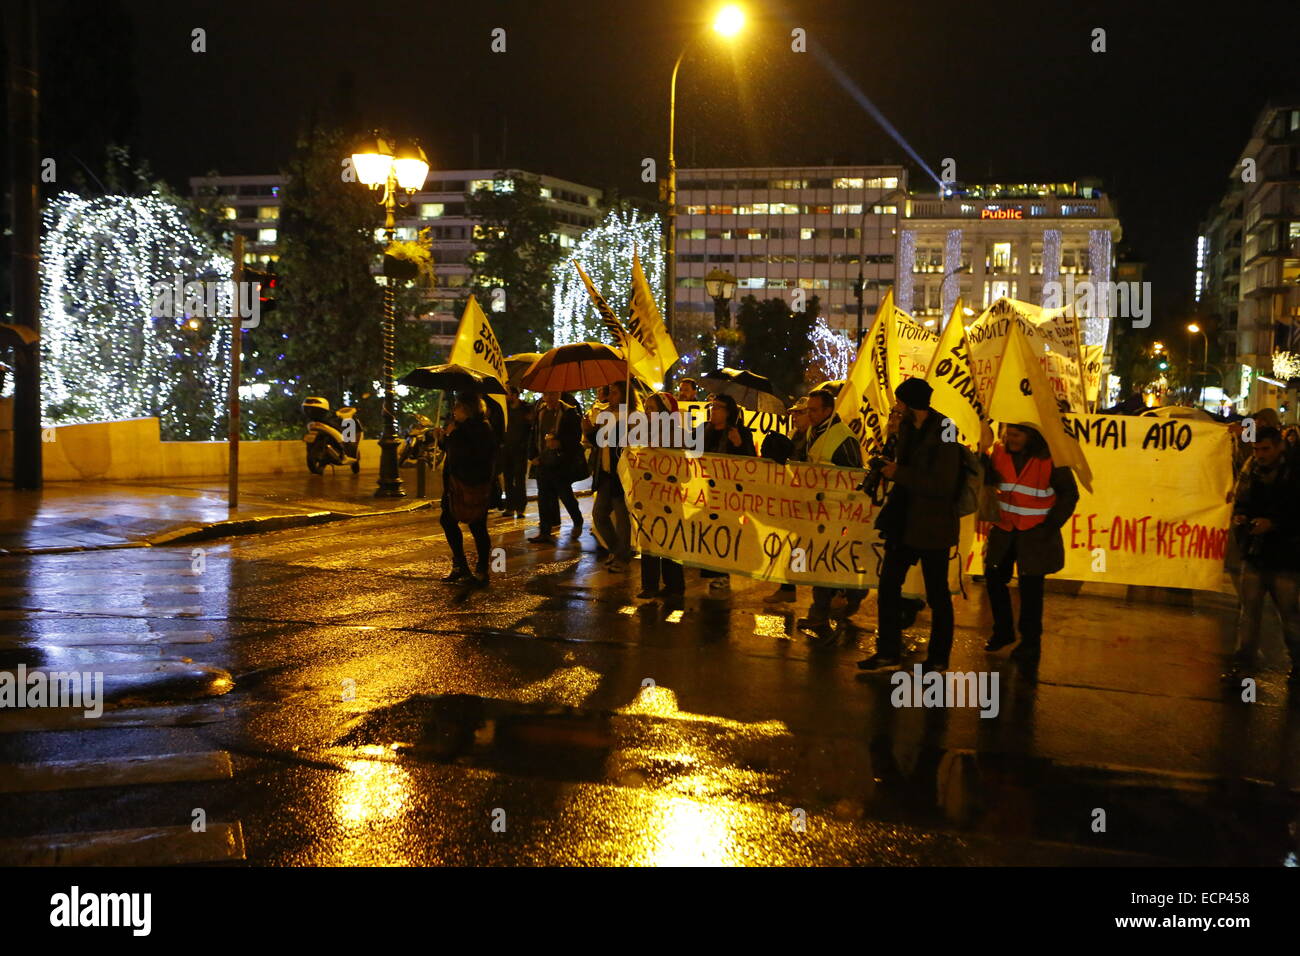 Athens, Greece. 17th December 2014. The protesters reach Syntagma Square outside the Greek Parliament. Greeks opposed to the current government protested outside the Parliament while the parliamentarians inside went to the ballot box for the first ballot of the Greek Presidential election. The governmental candidate got only 160 of the required 200 votes. Credit:  Michael Debets/Alamy Live News Stock Photo